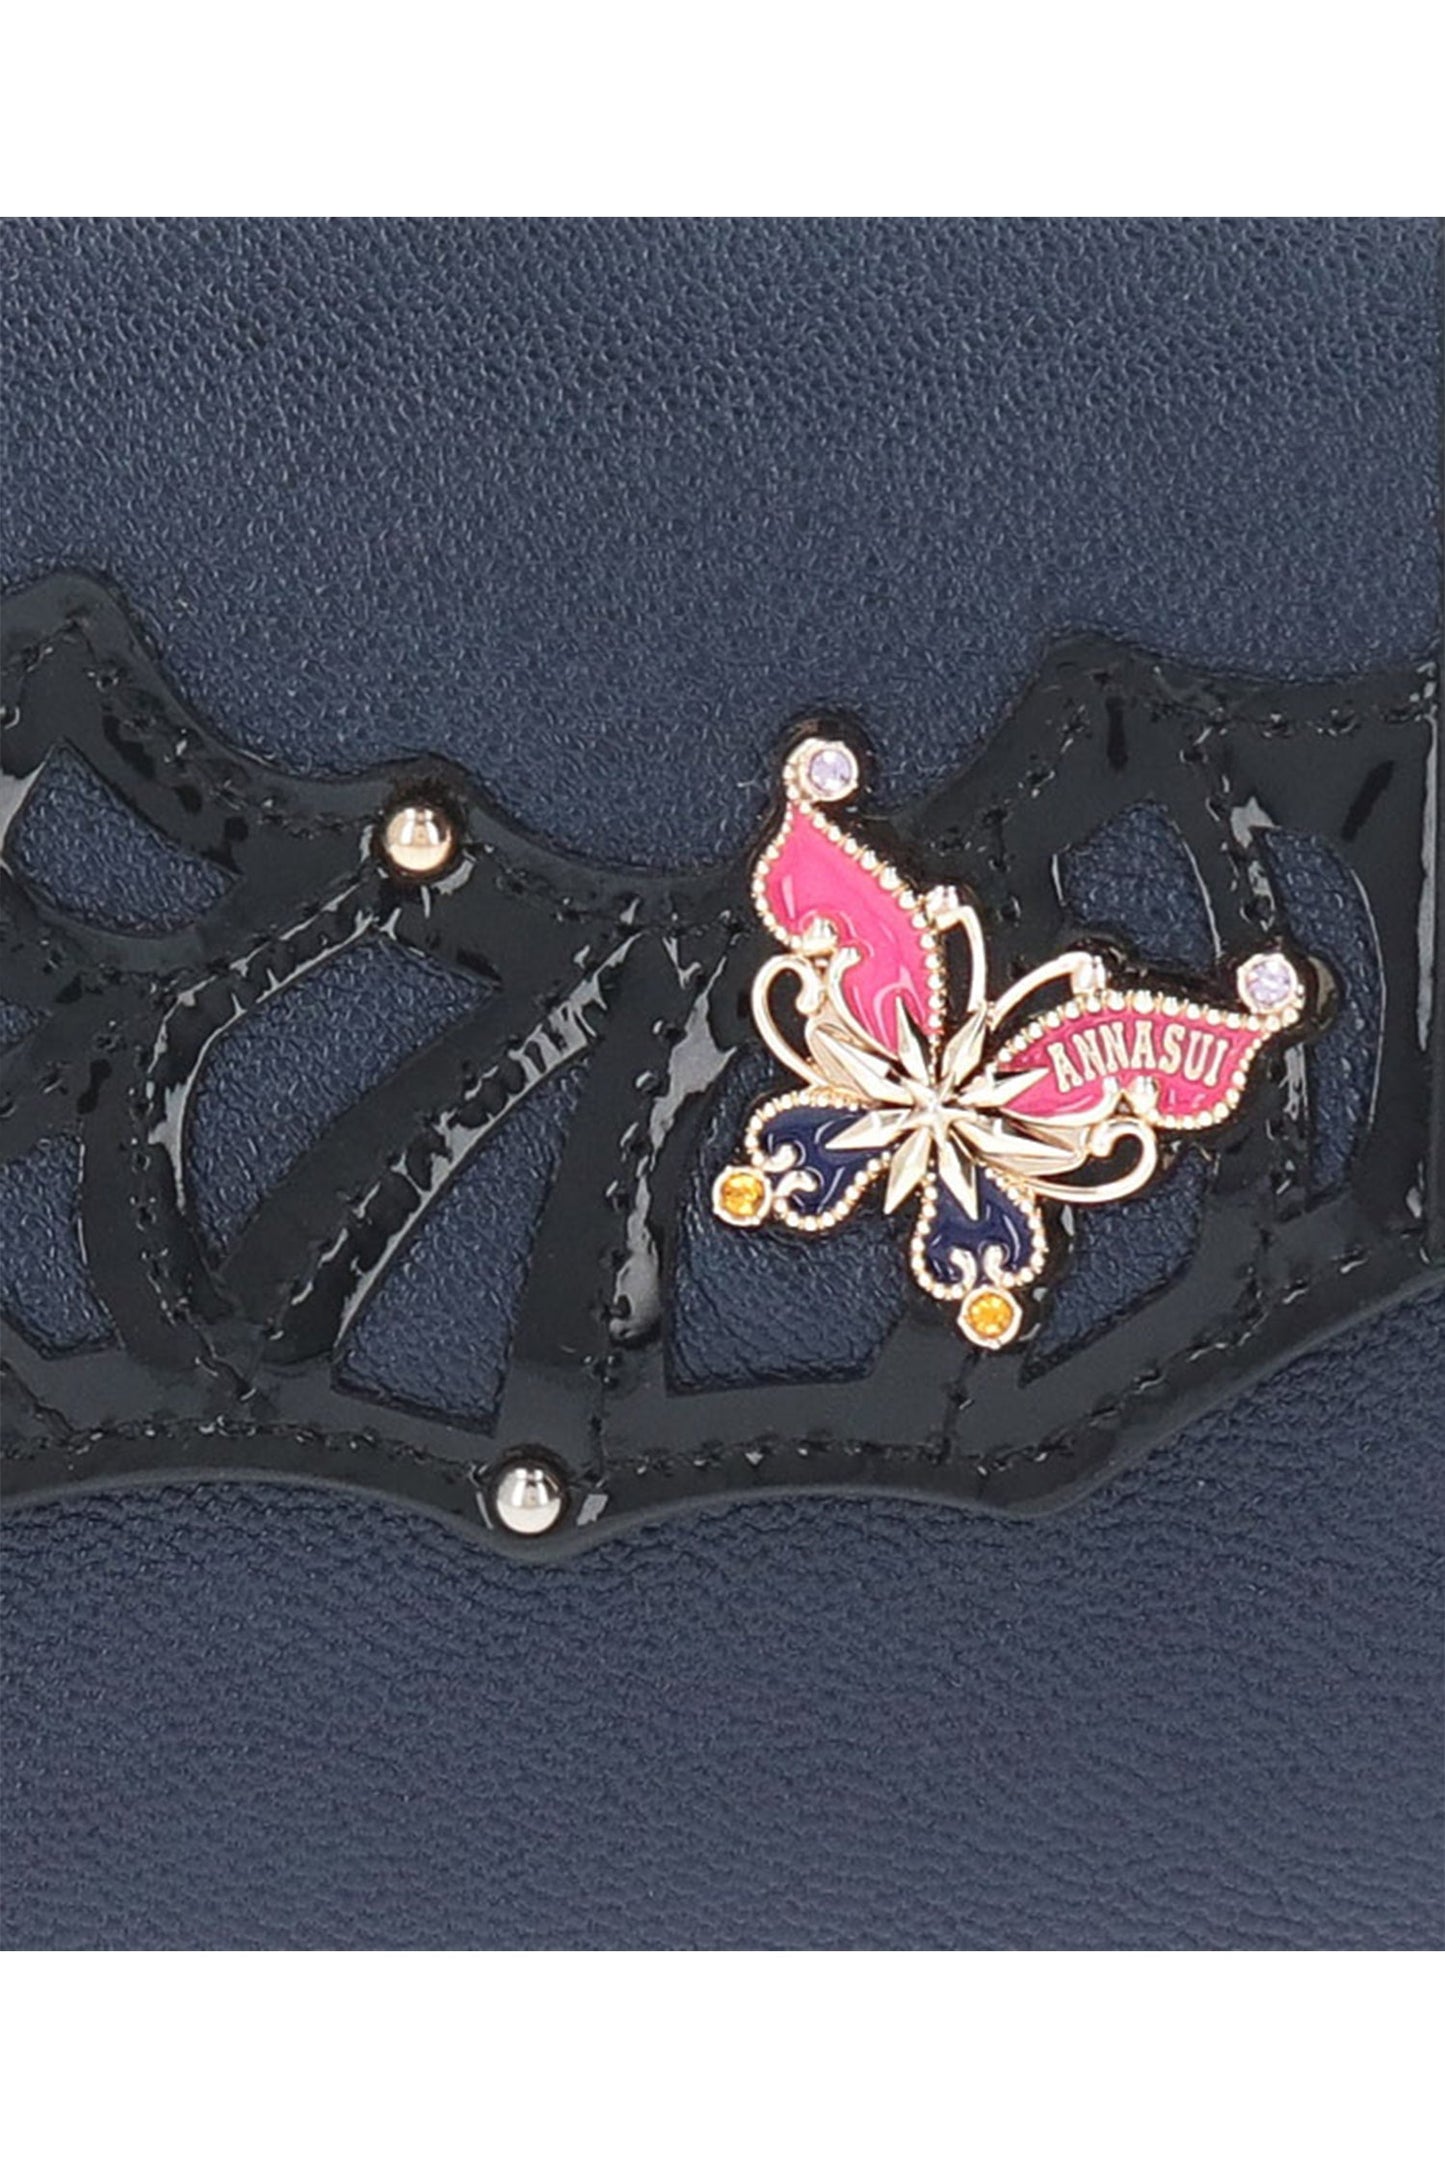 Golden butterfly, pink wings up, Anna Sui label, blue down, center with star, gemstones